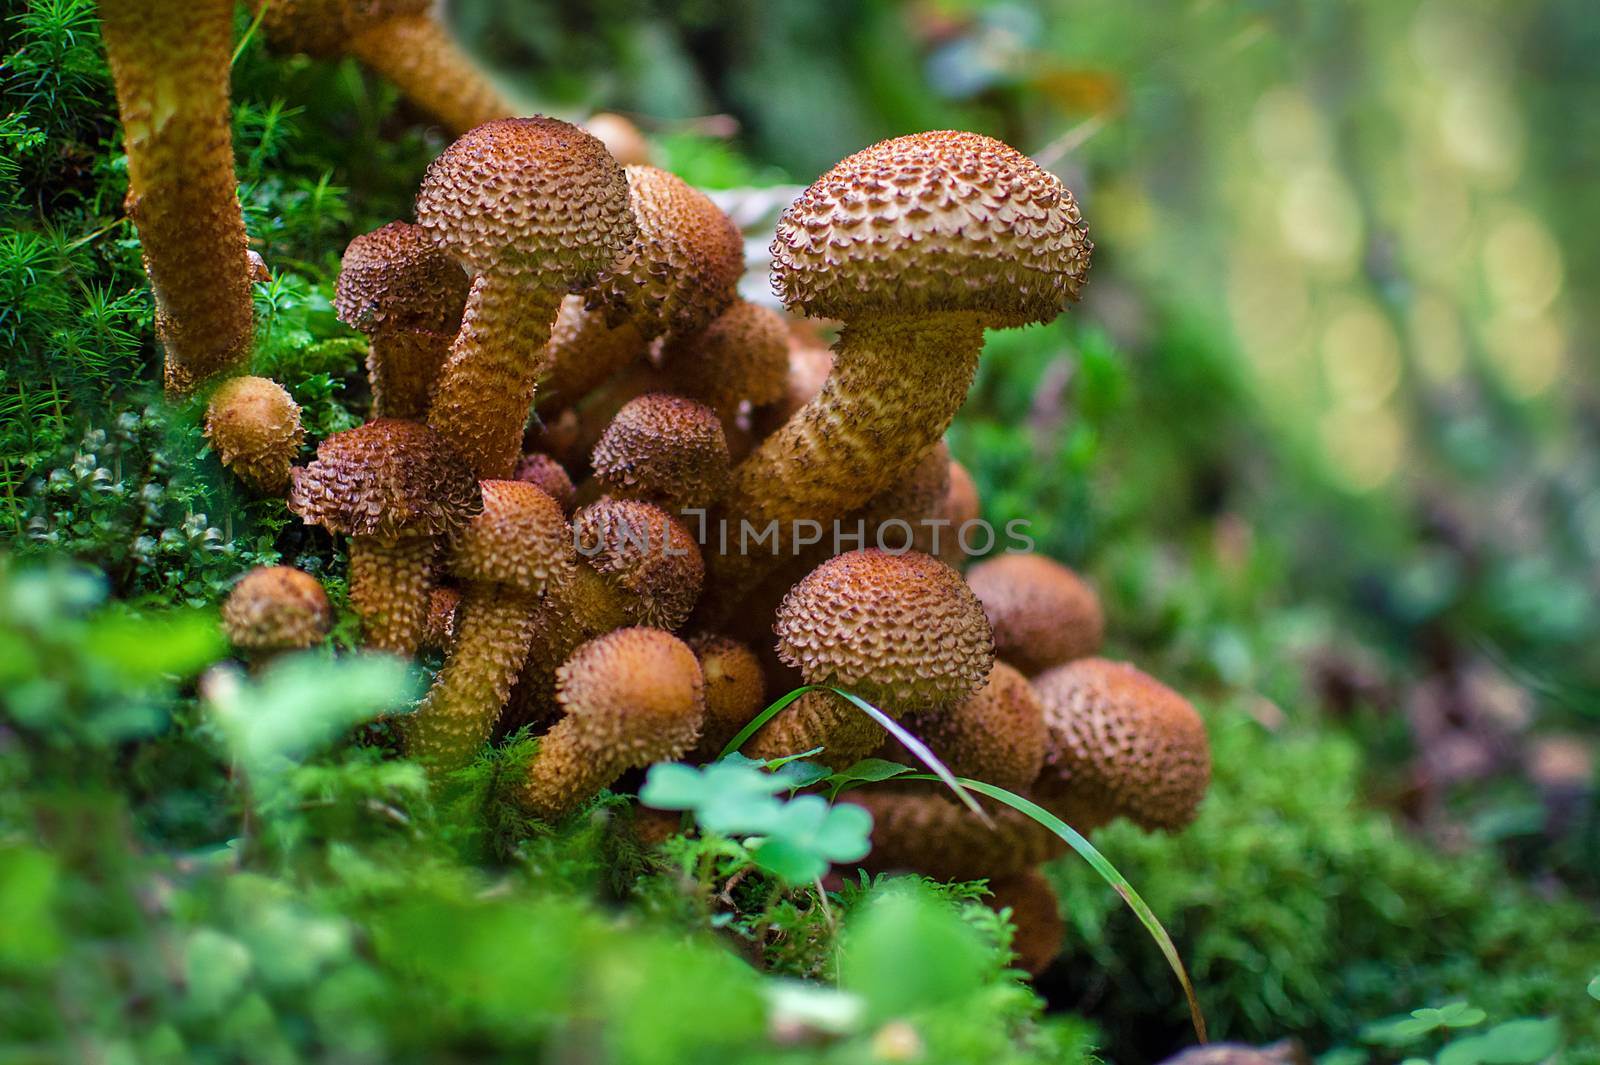 Fungus in the natural autumn environment. Mushrooms macro on moss. Scenic nature background